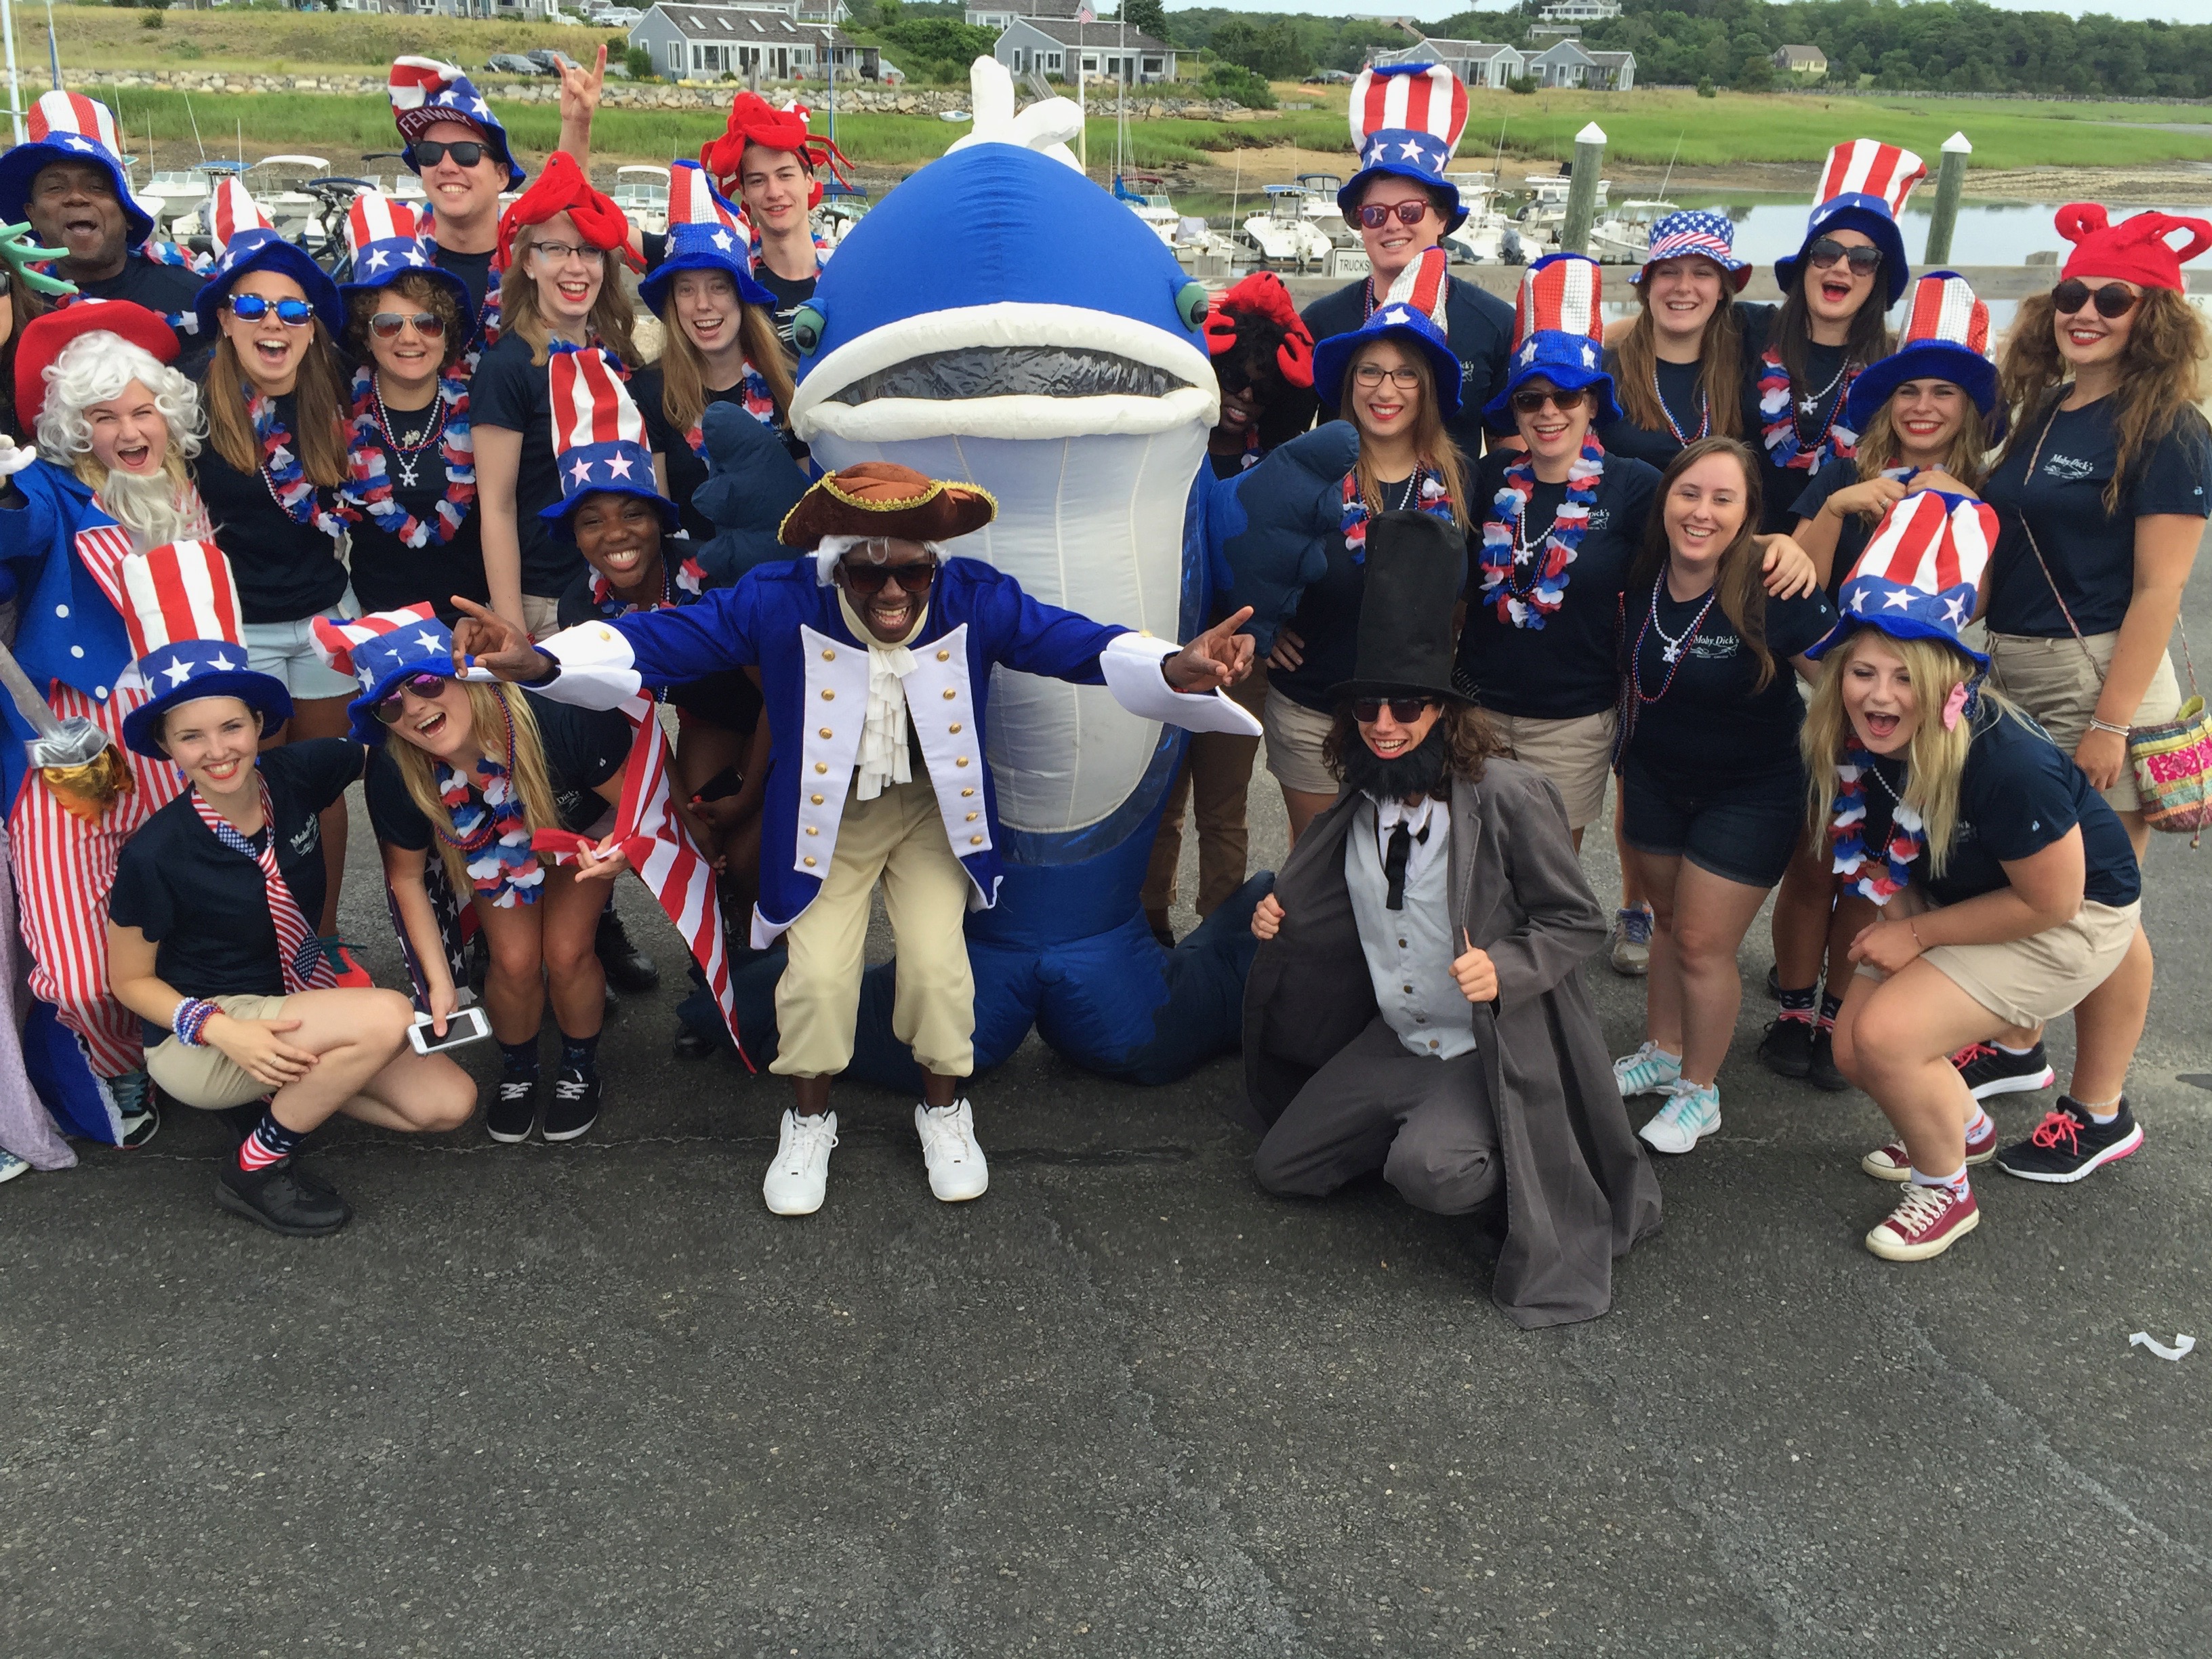 group photo of Moby Dick's restaurant staff dressed in Patriotic attire with person dressed in whale costume in front of the harbor